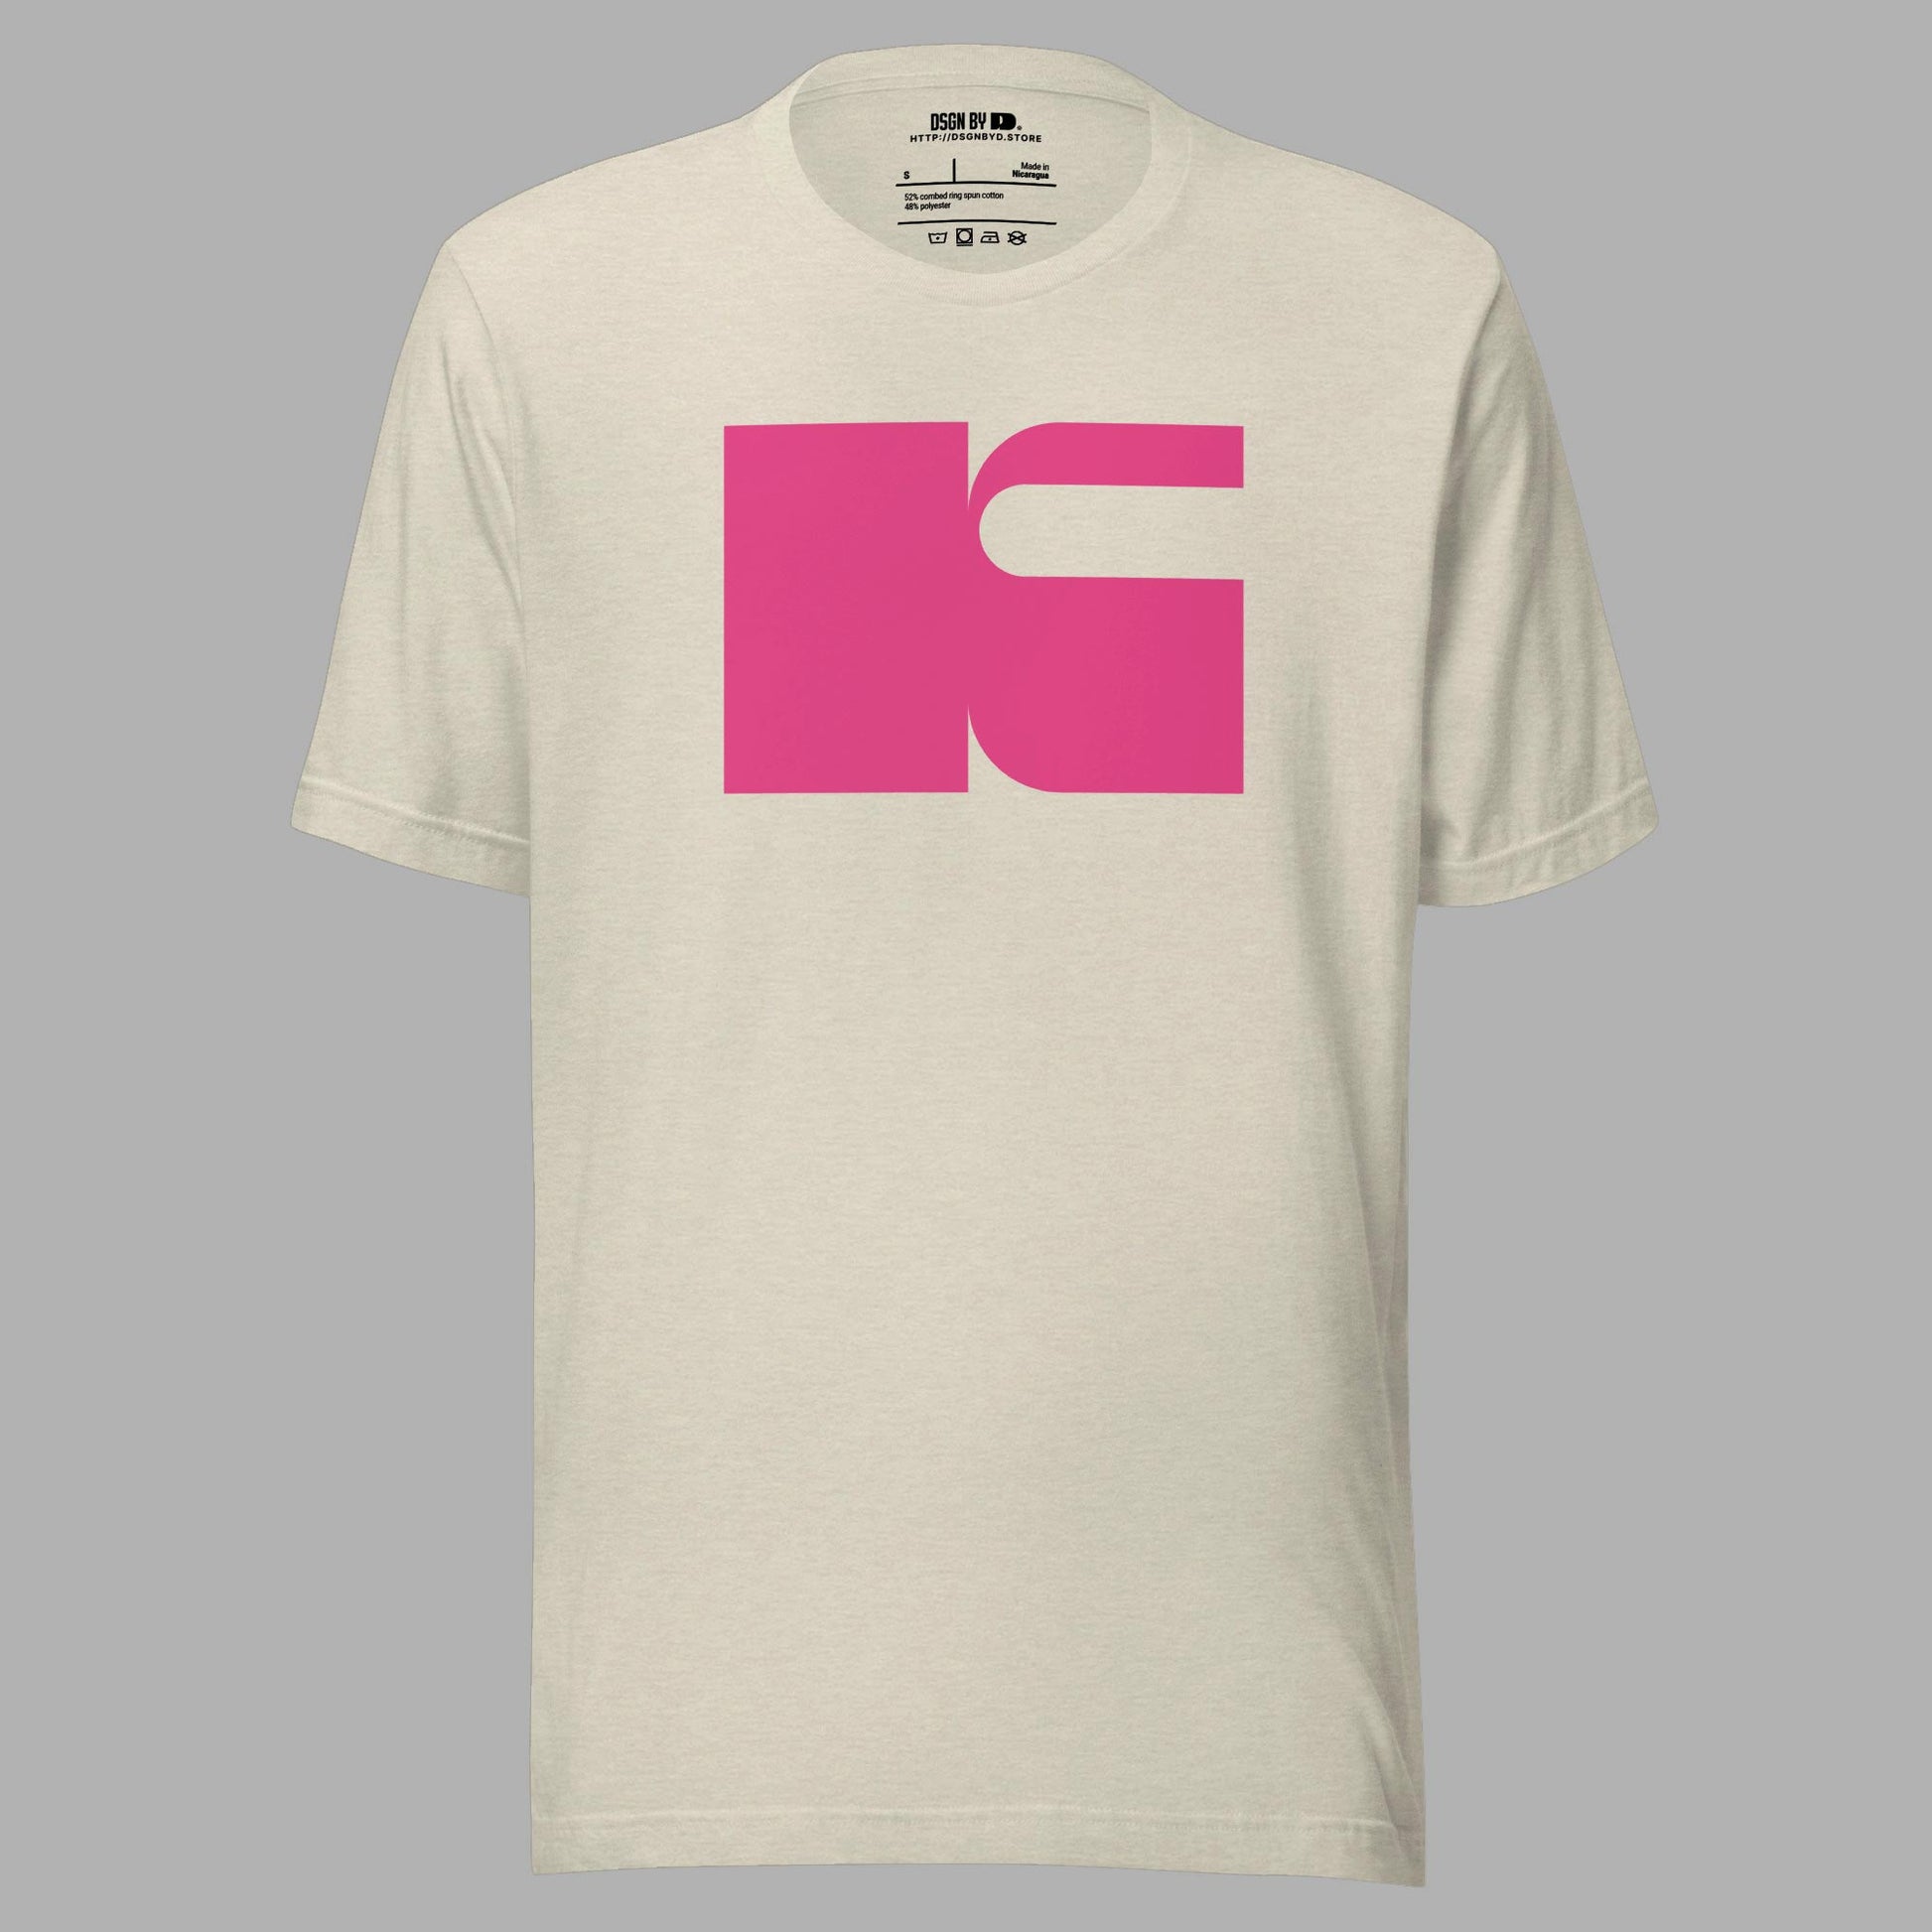 A beige cotton unisex graphic tee with letter K.